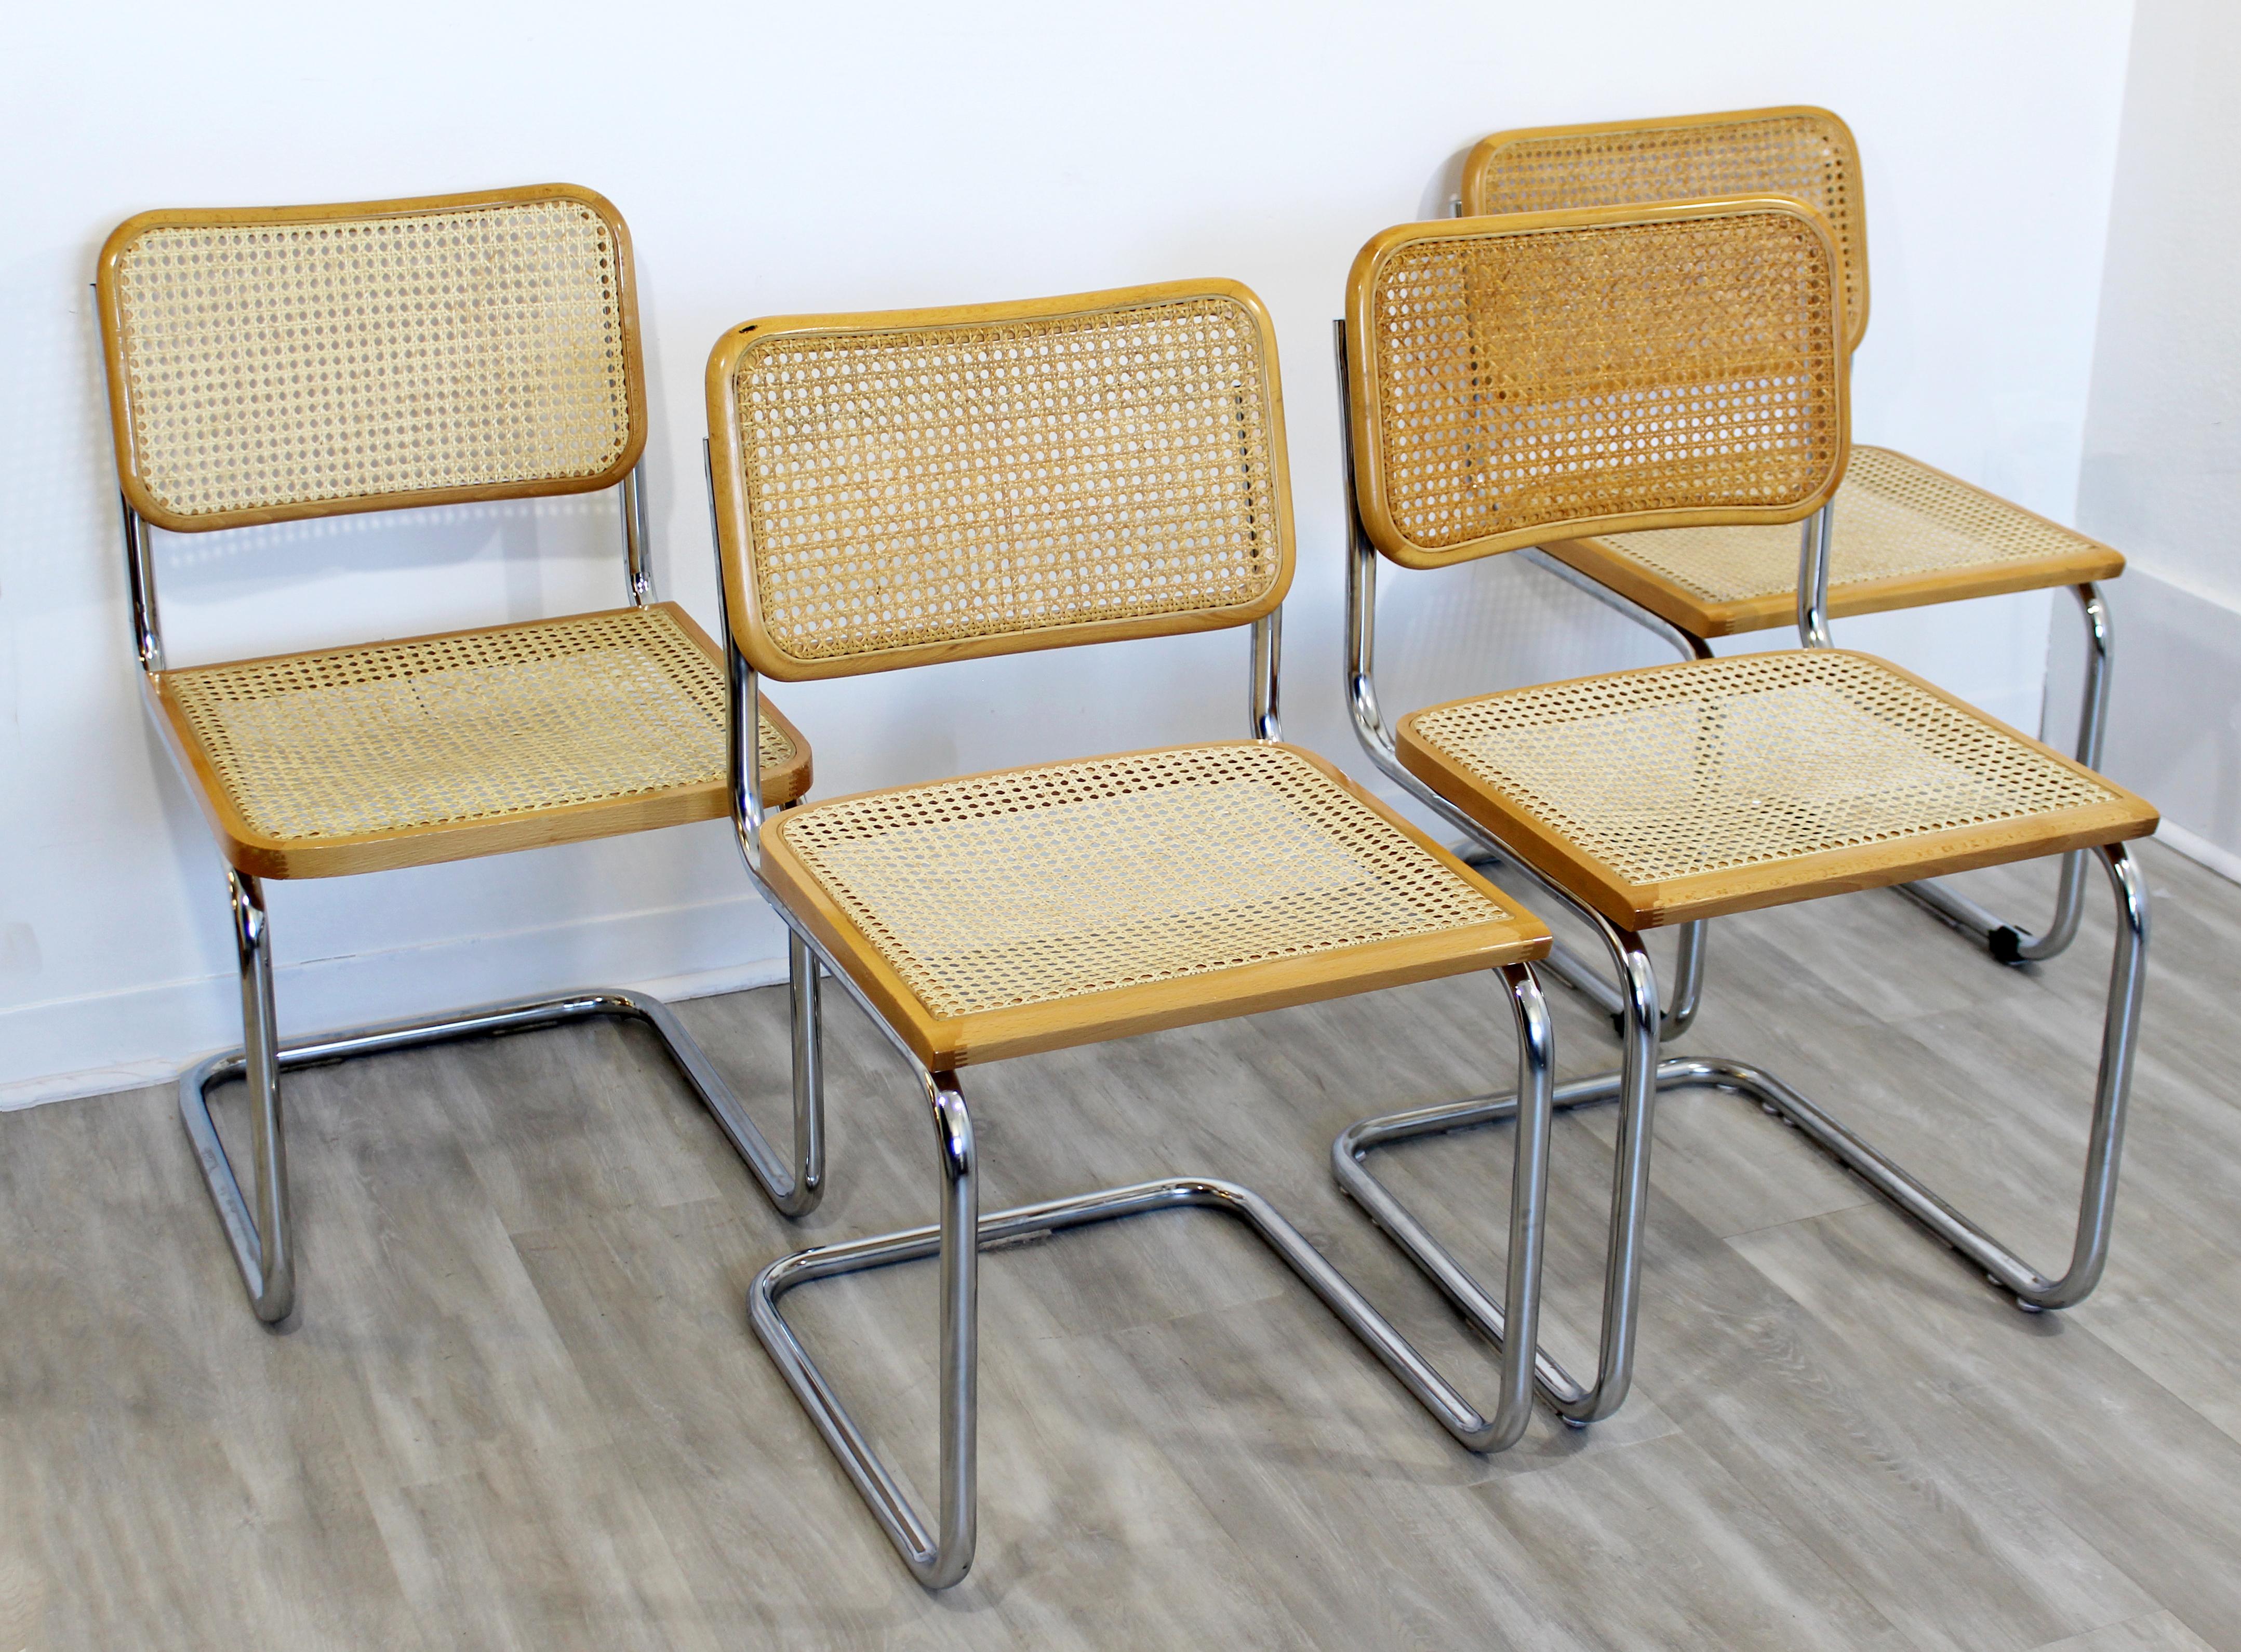 For your consideration is a great set of four, wood and cane side chairs, on cantilever chrome bases, by Marcel Breuer, made in Italy, circa 1970s. Three of the chairs have squared seats and one has a rounded seat. In very good vintage condition.